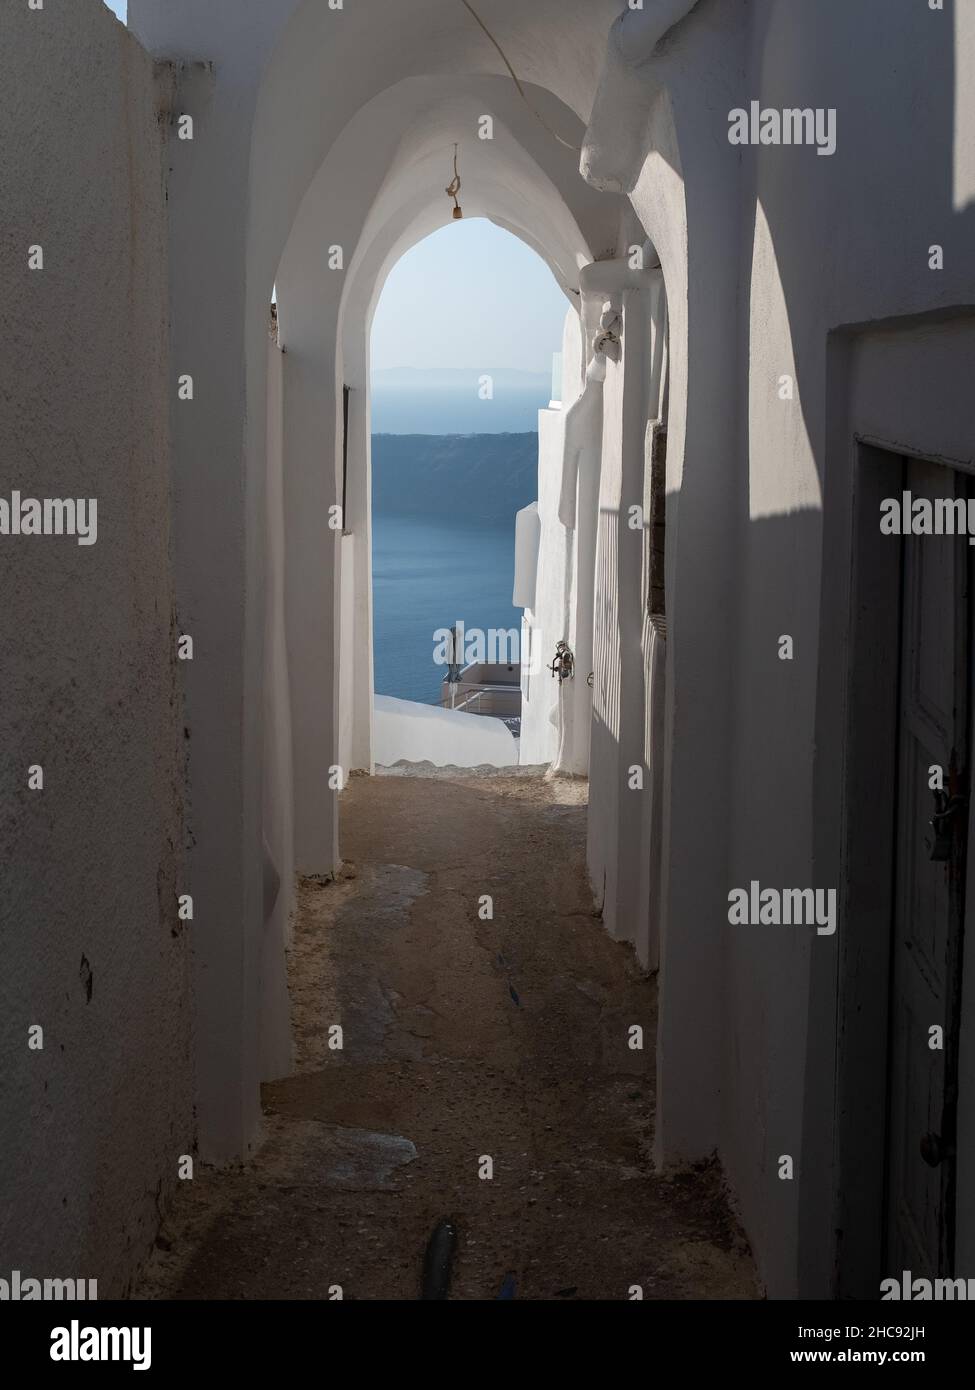 A vaulted passageway toward  the Aegean sea with no people. Taken at the end of a sunny summer day in the Aegean Island of Santorini, Greece Stock Photo